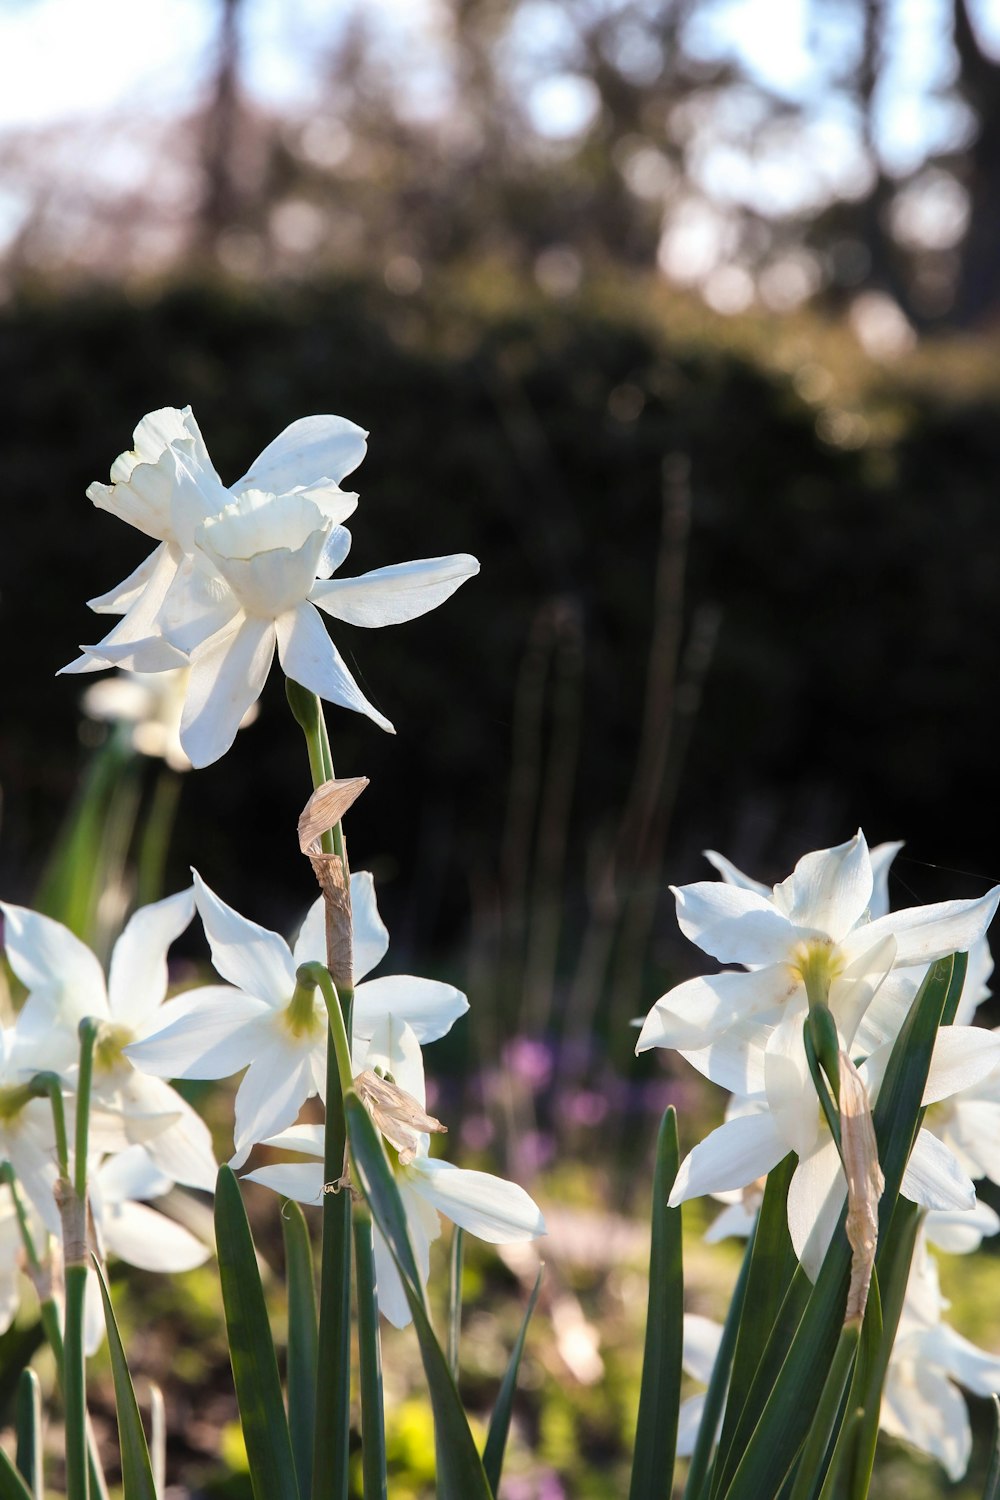 a group of white flowers in a garden